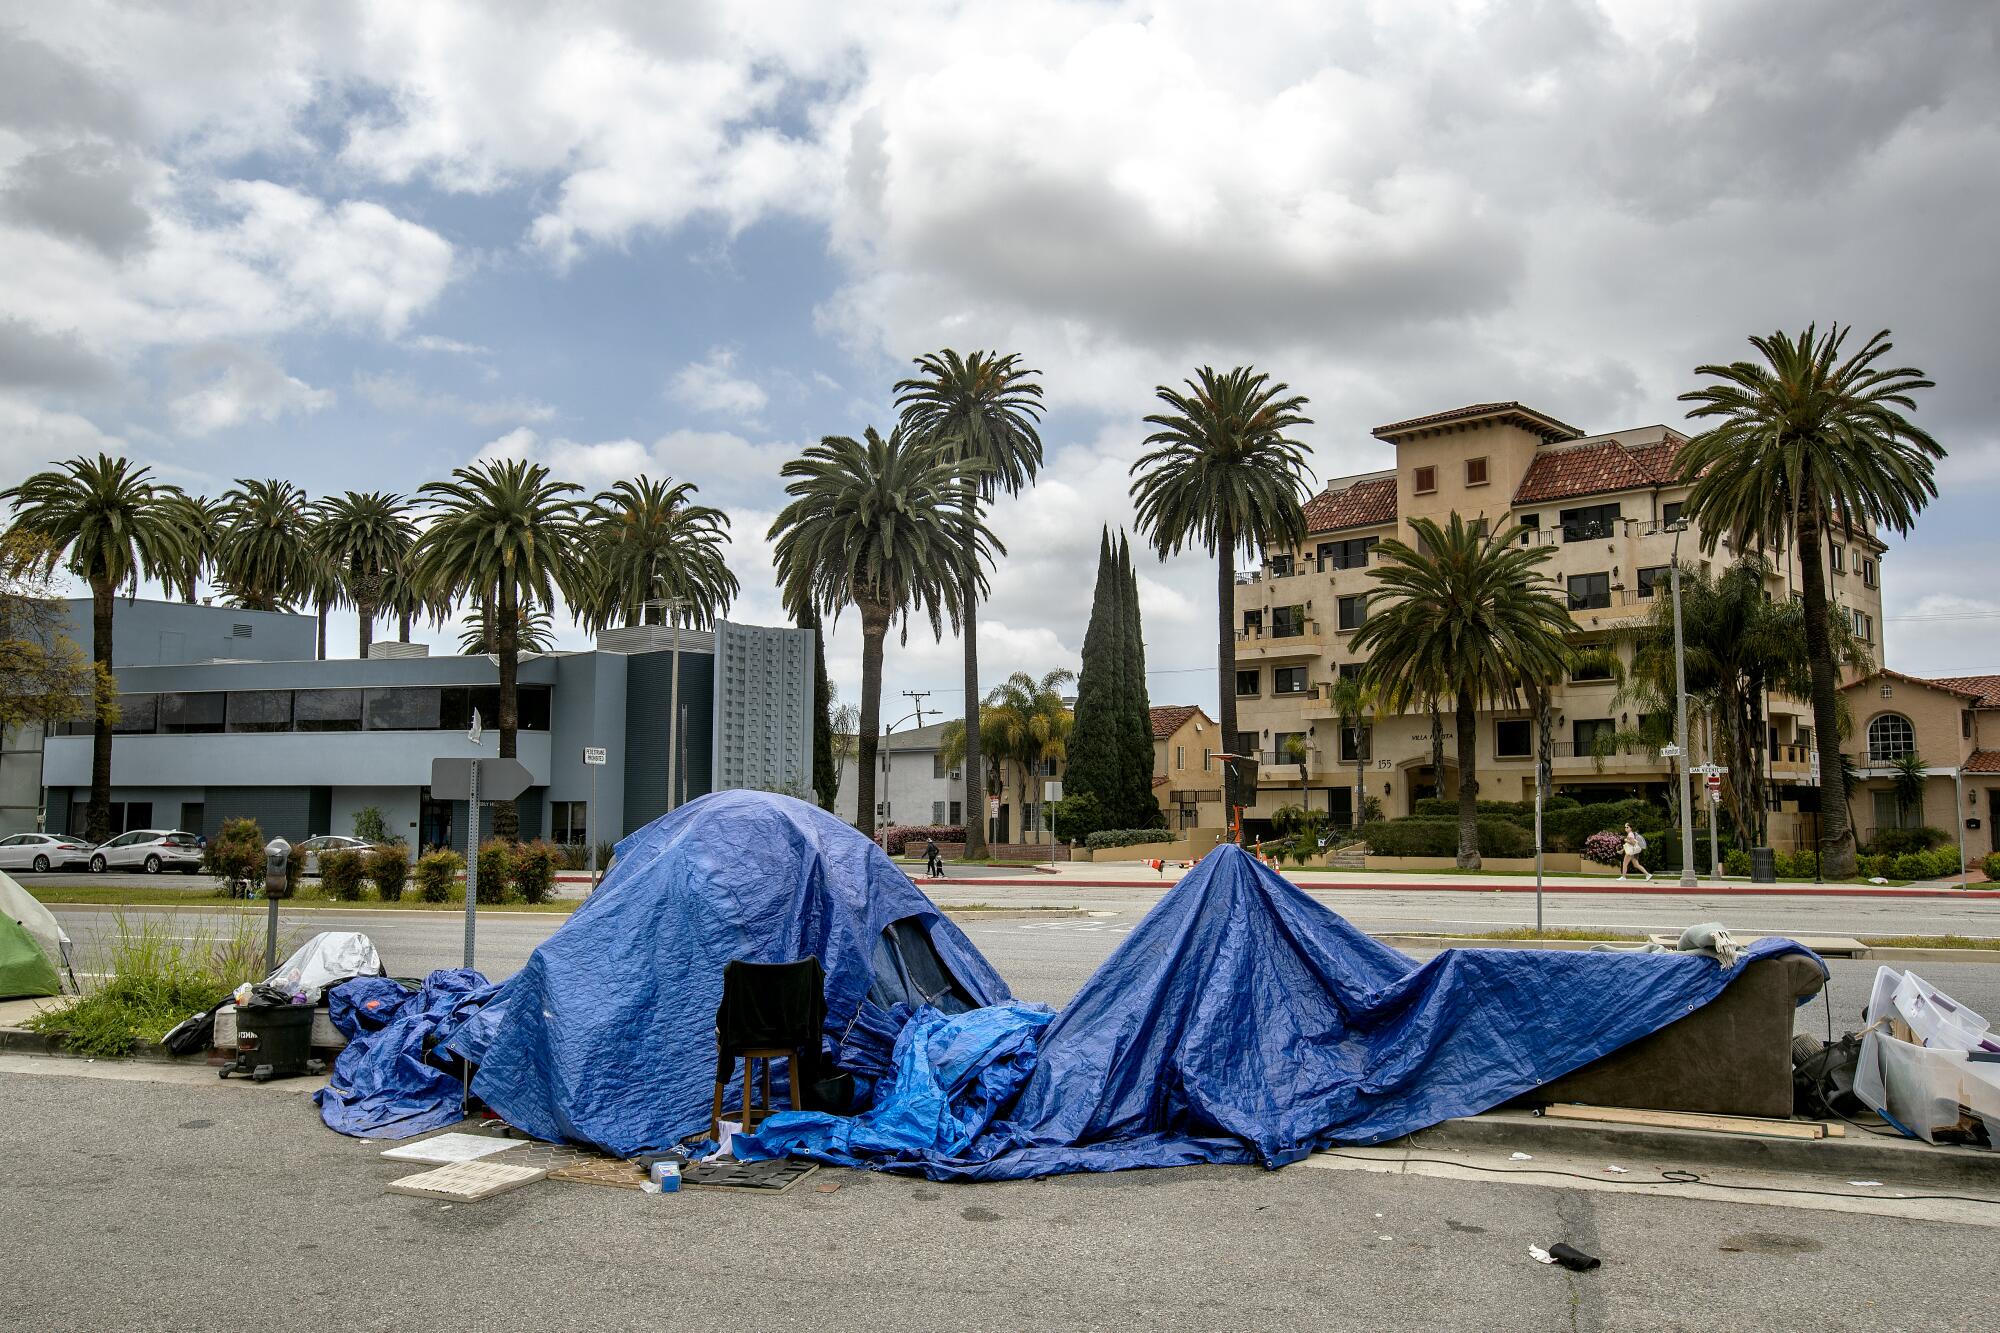 A blue tarp drapes over two tents pitched on a street median. Multi-story buildings and palm trees line the street across